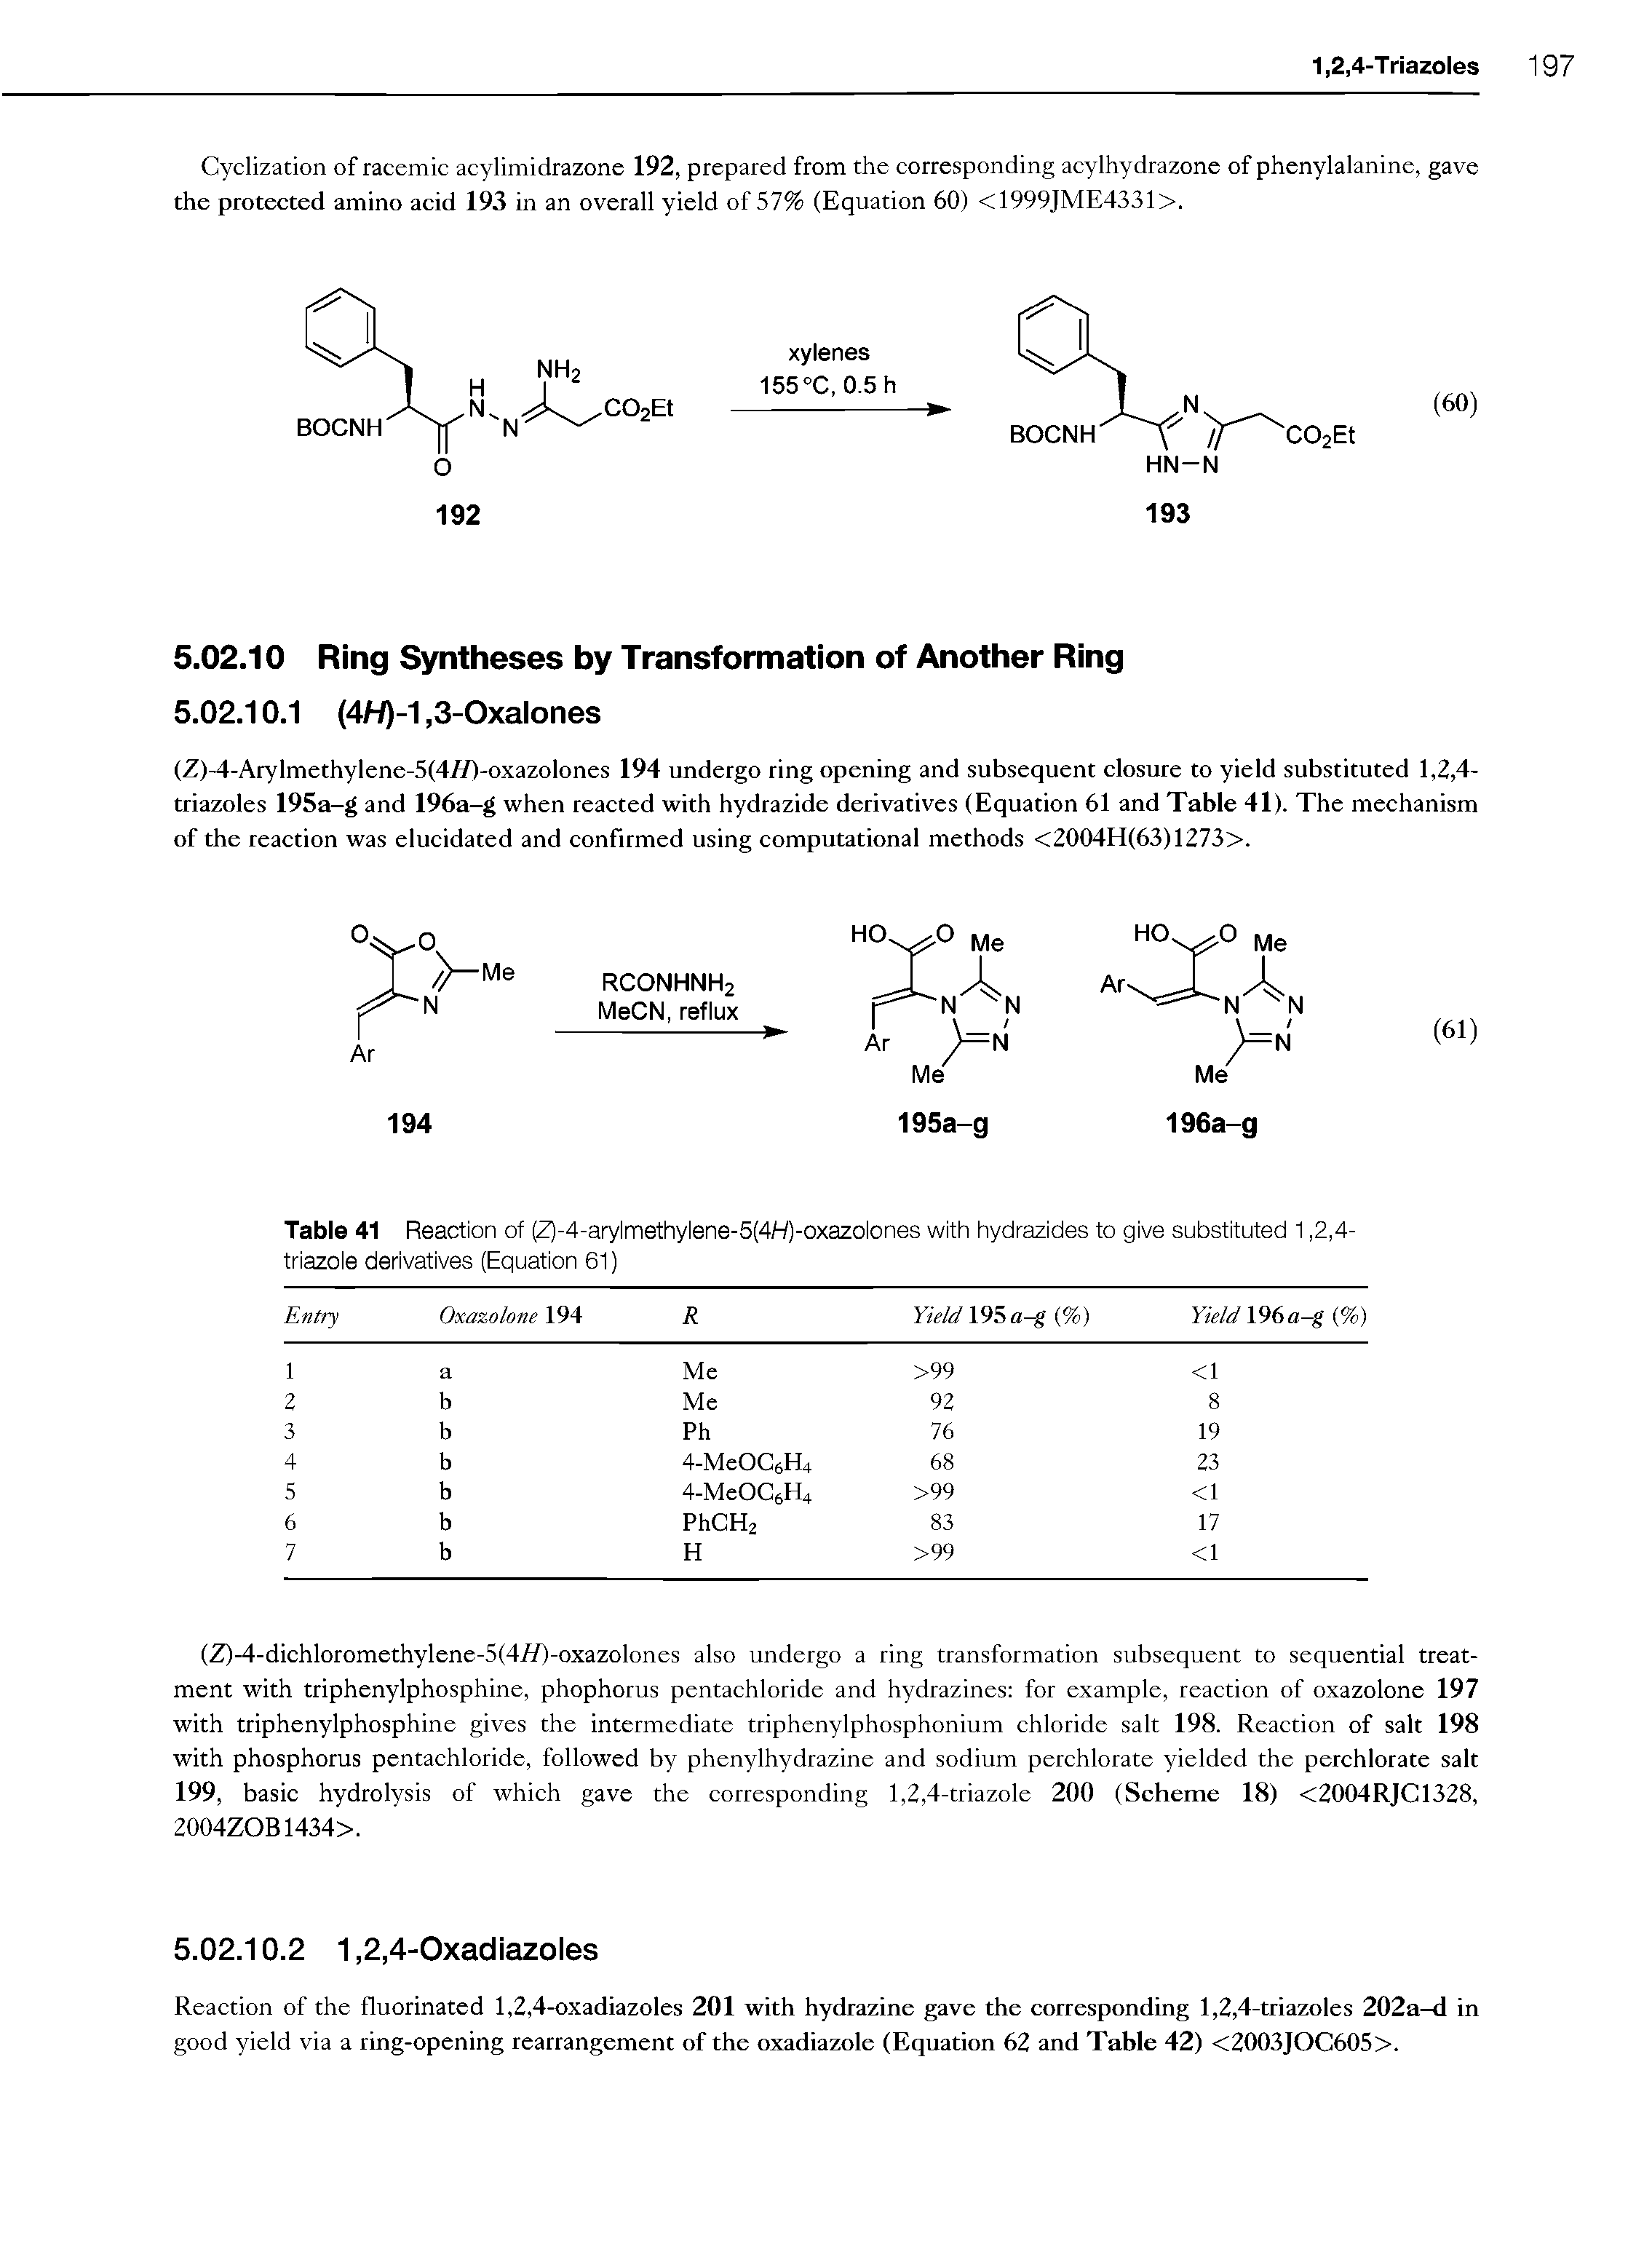 Table 41 Reaction of (Z)-4-arylmethylene-5(4H)-oxazolones with hydrazides to give substituted 1,2,4-triazole derivatives (Equation 61)...